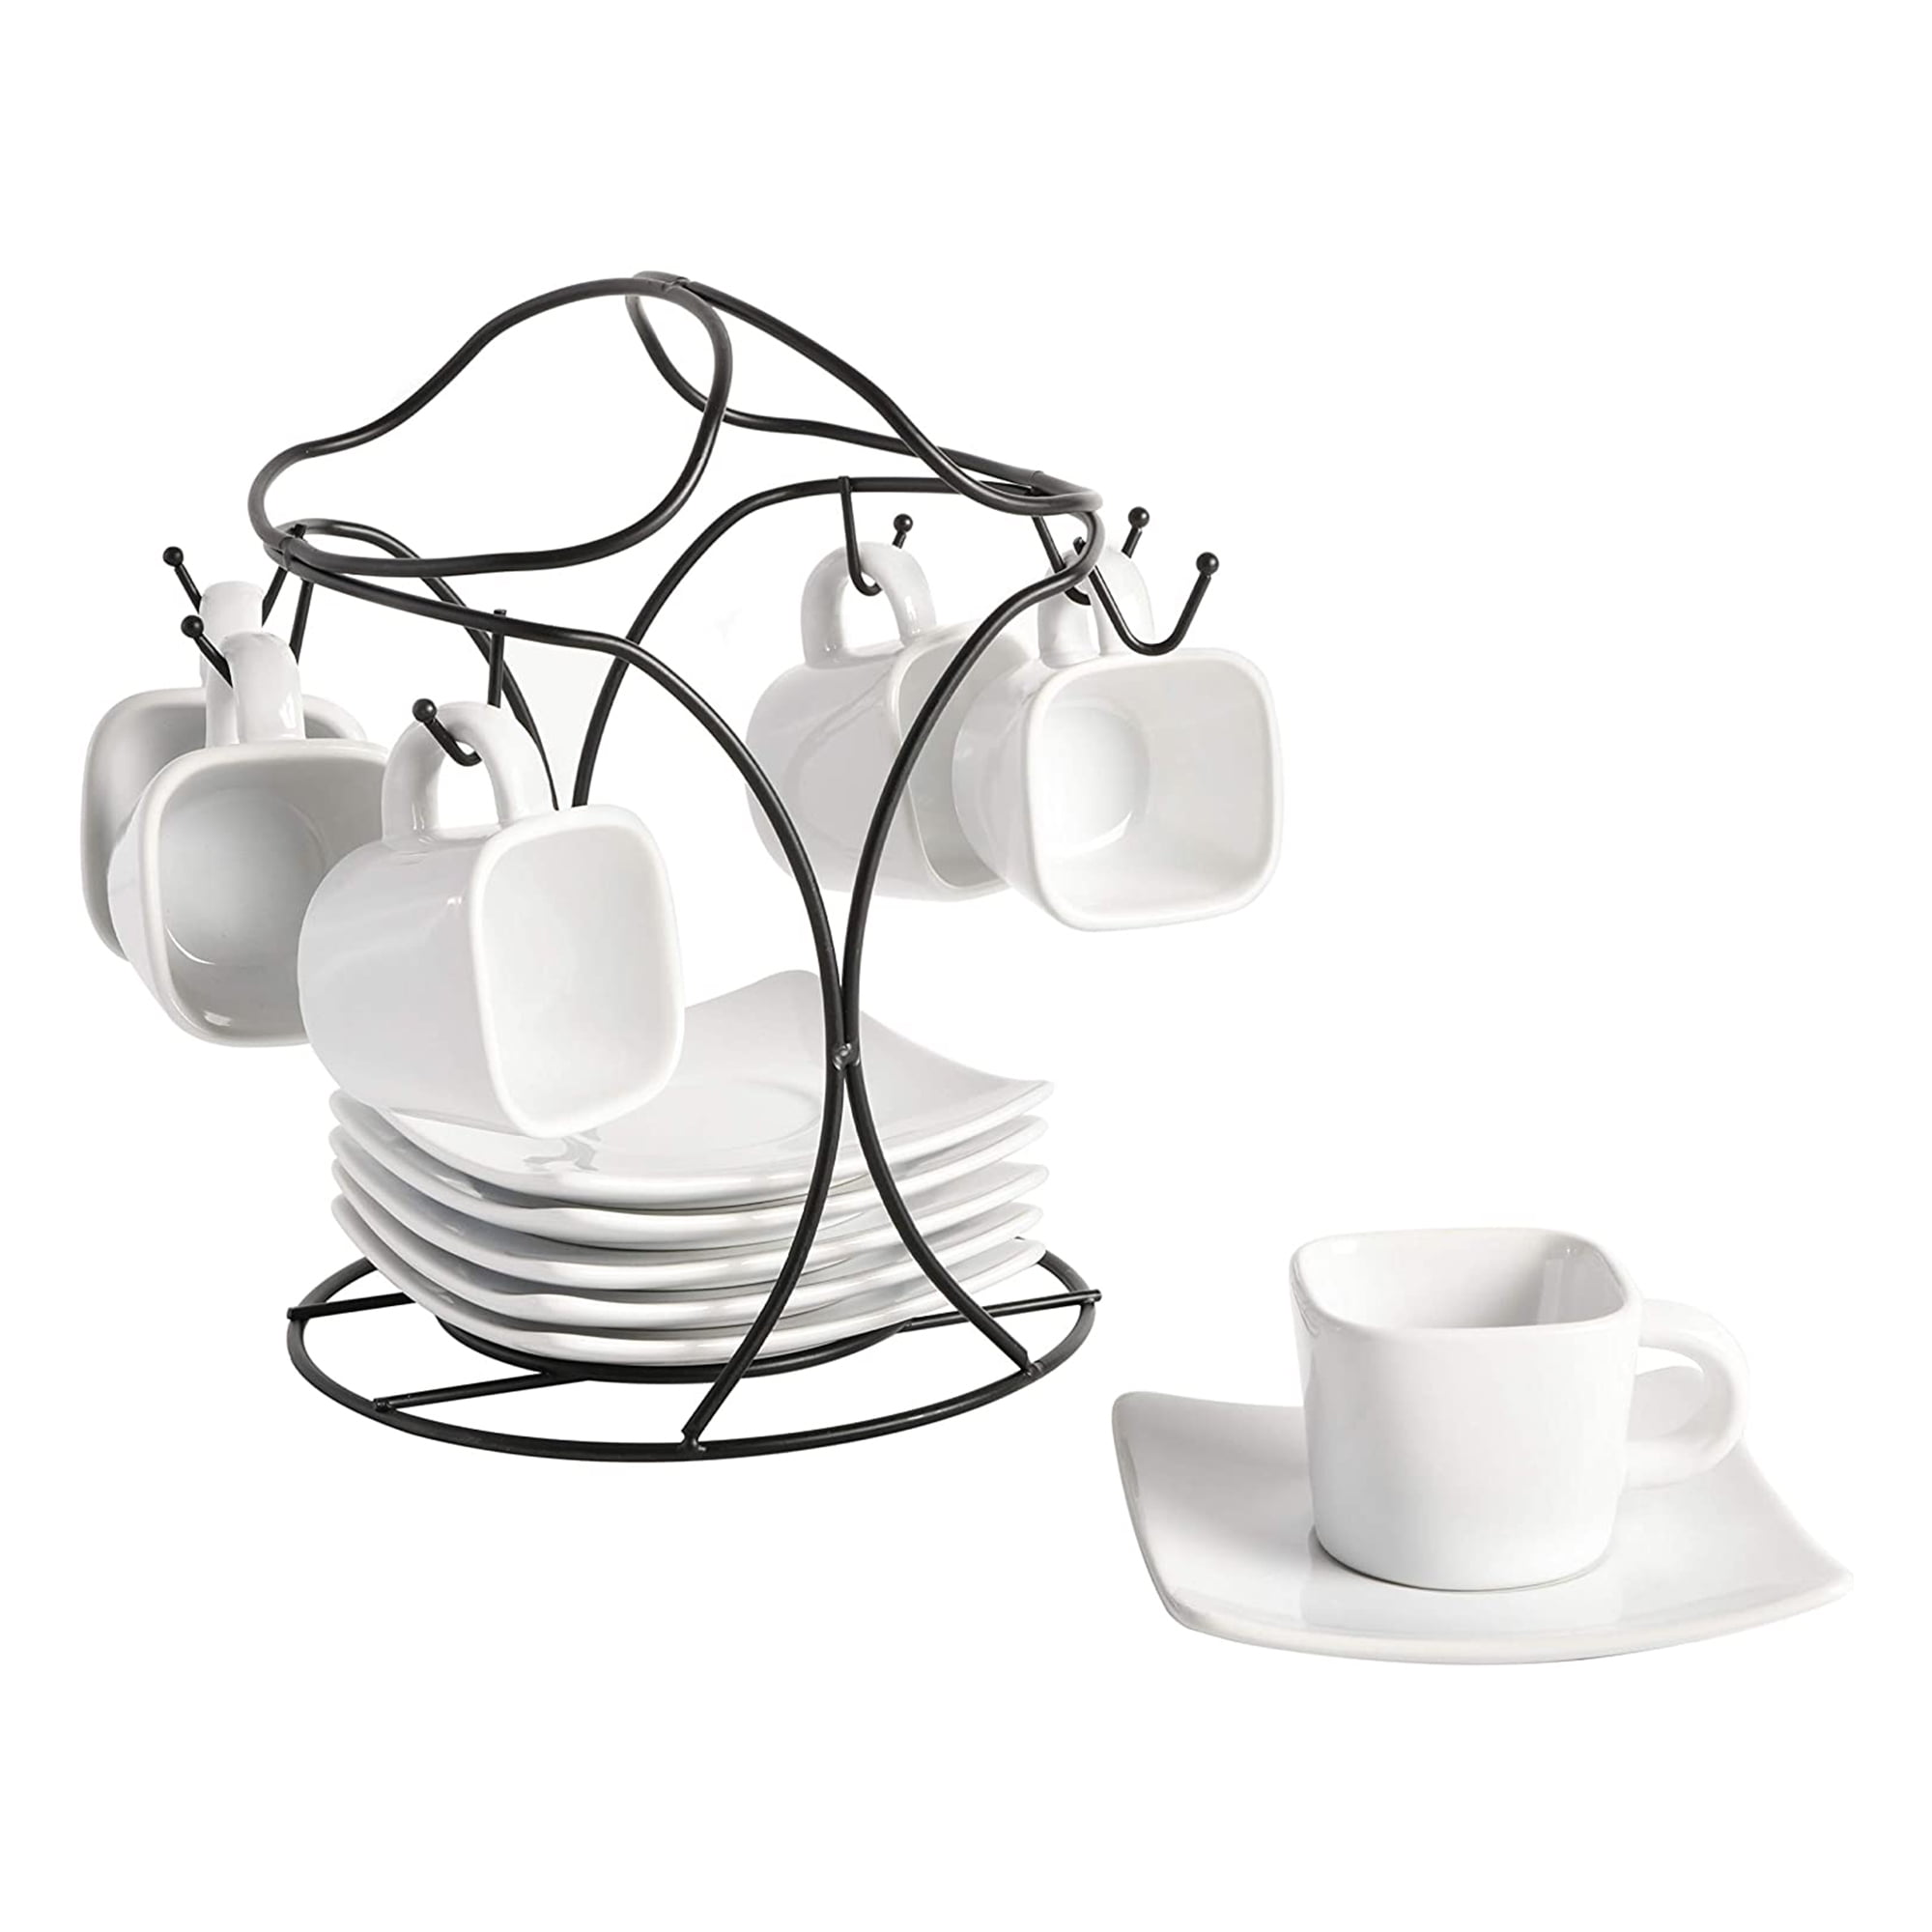 Gibson Soho Lounge Stackable Glass Espresso Cups with Rack, Glass, 4-Piece